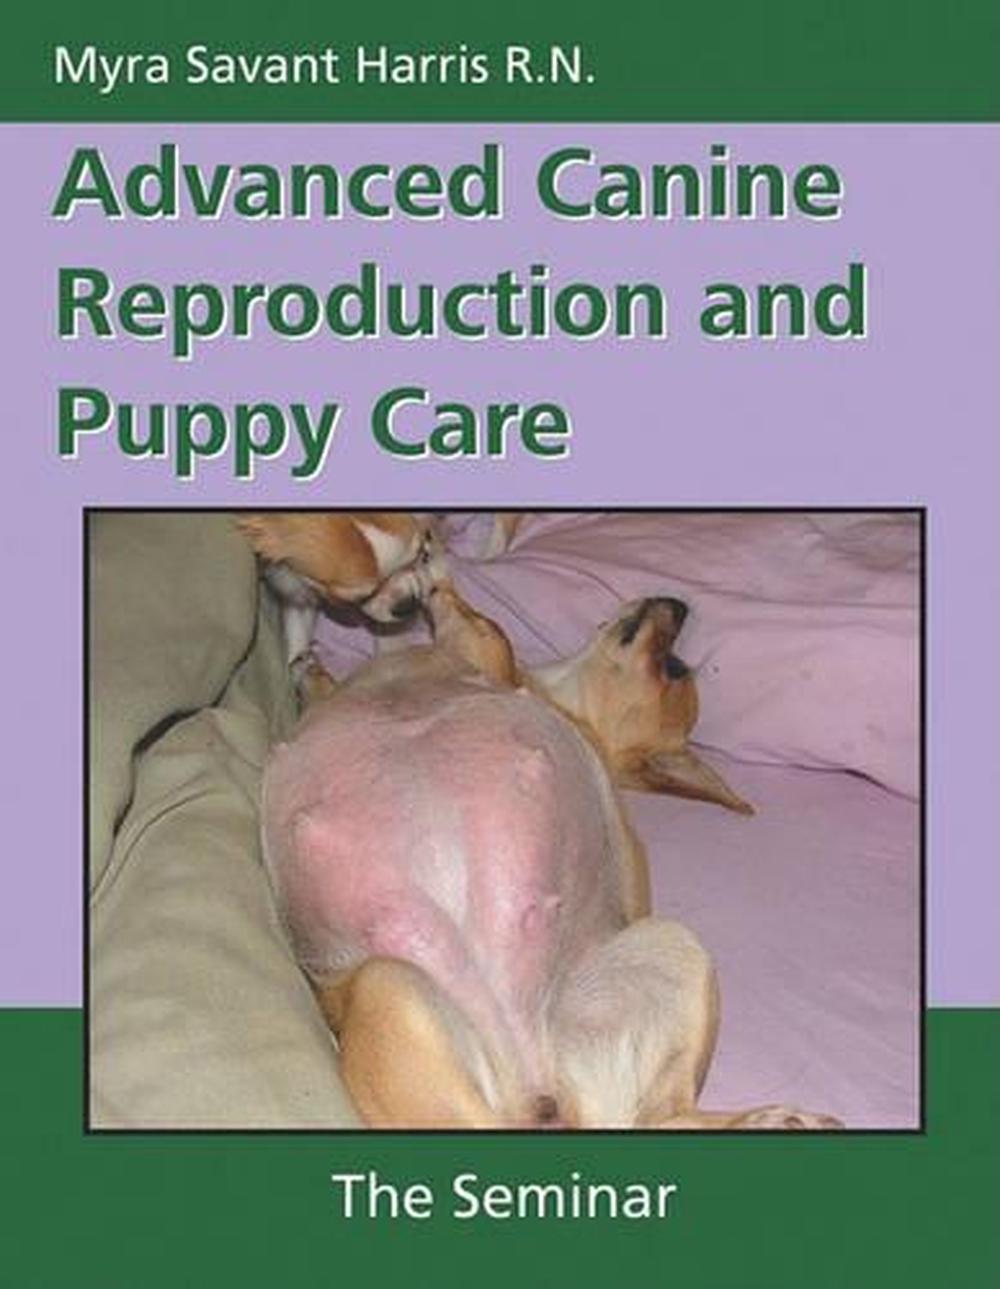 Advanced Canine Reproduction and Puppy Care The Seminar by Myra Savant